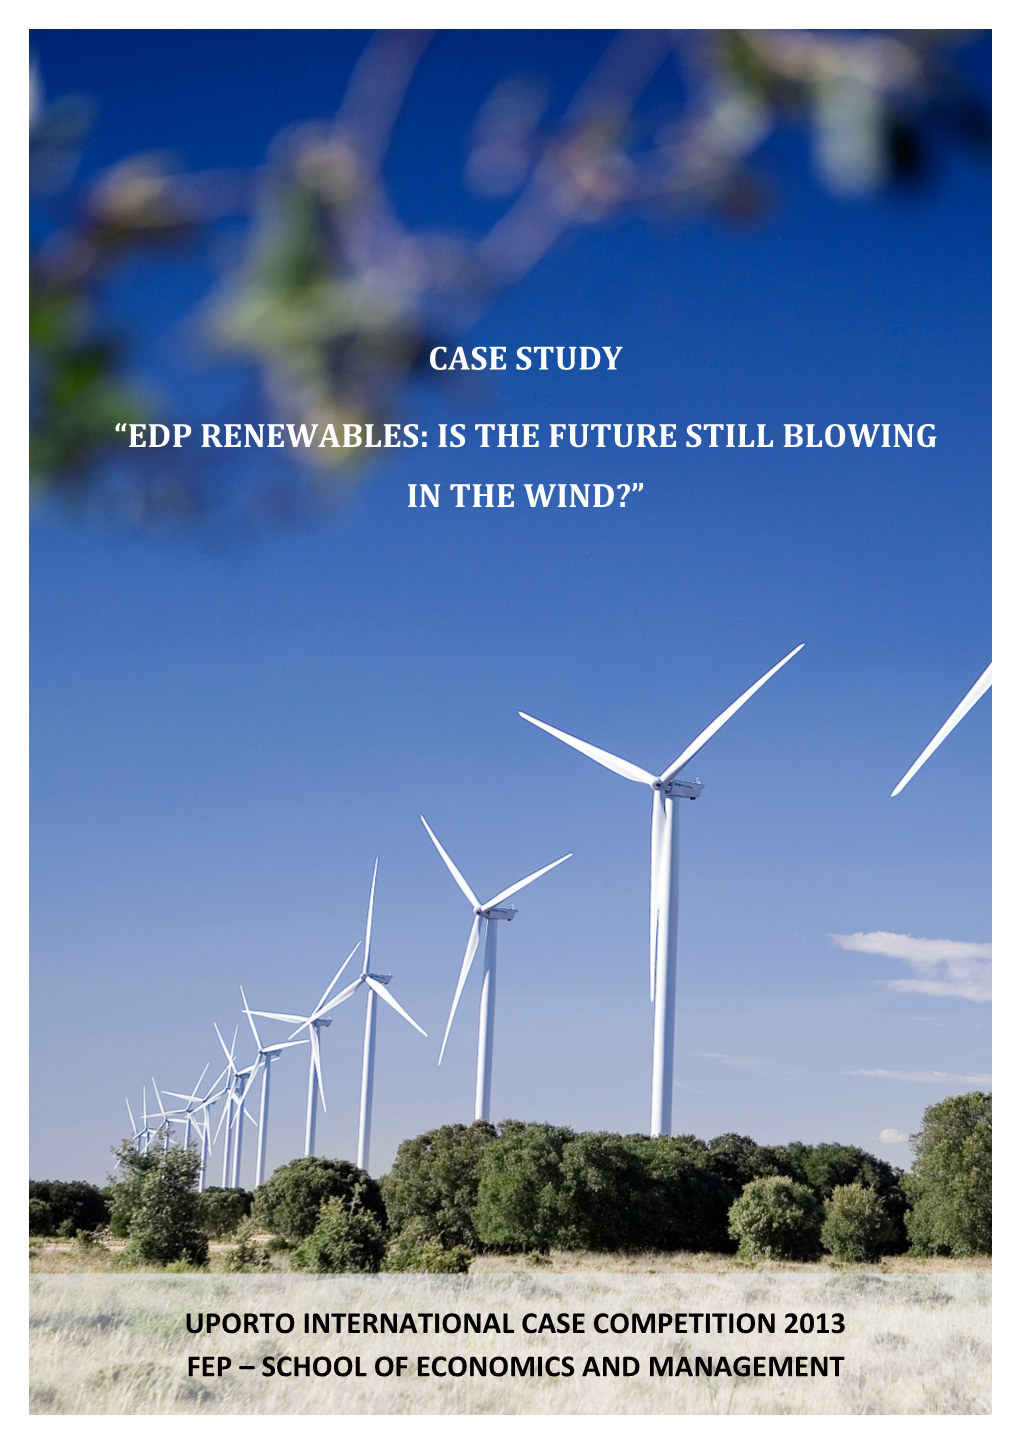 Case Study “Edp Renewables: Is the Future Still Blowing in the Wind?”